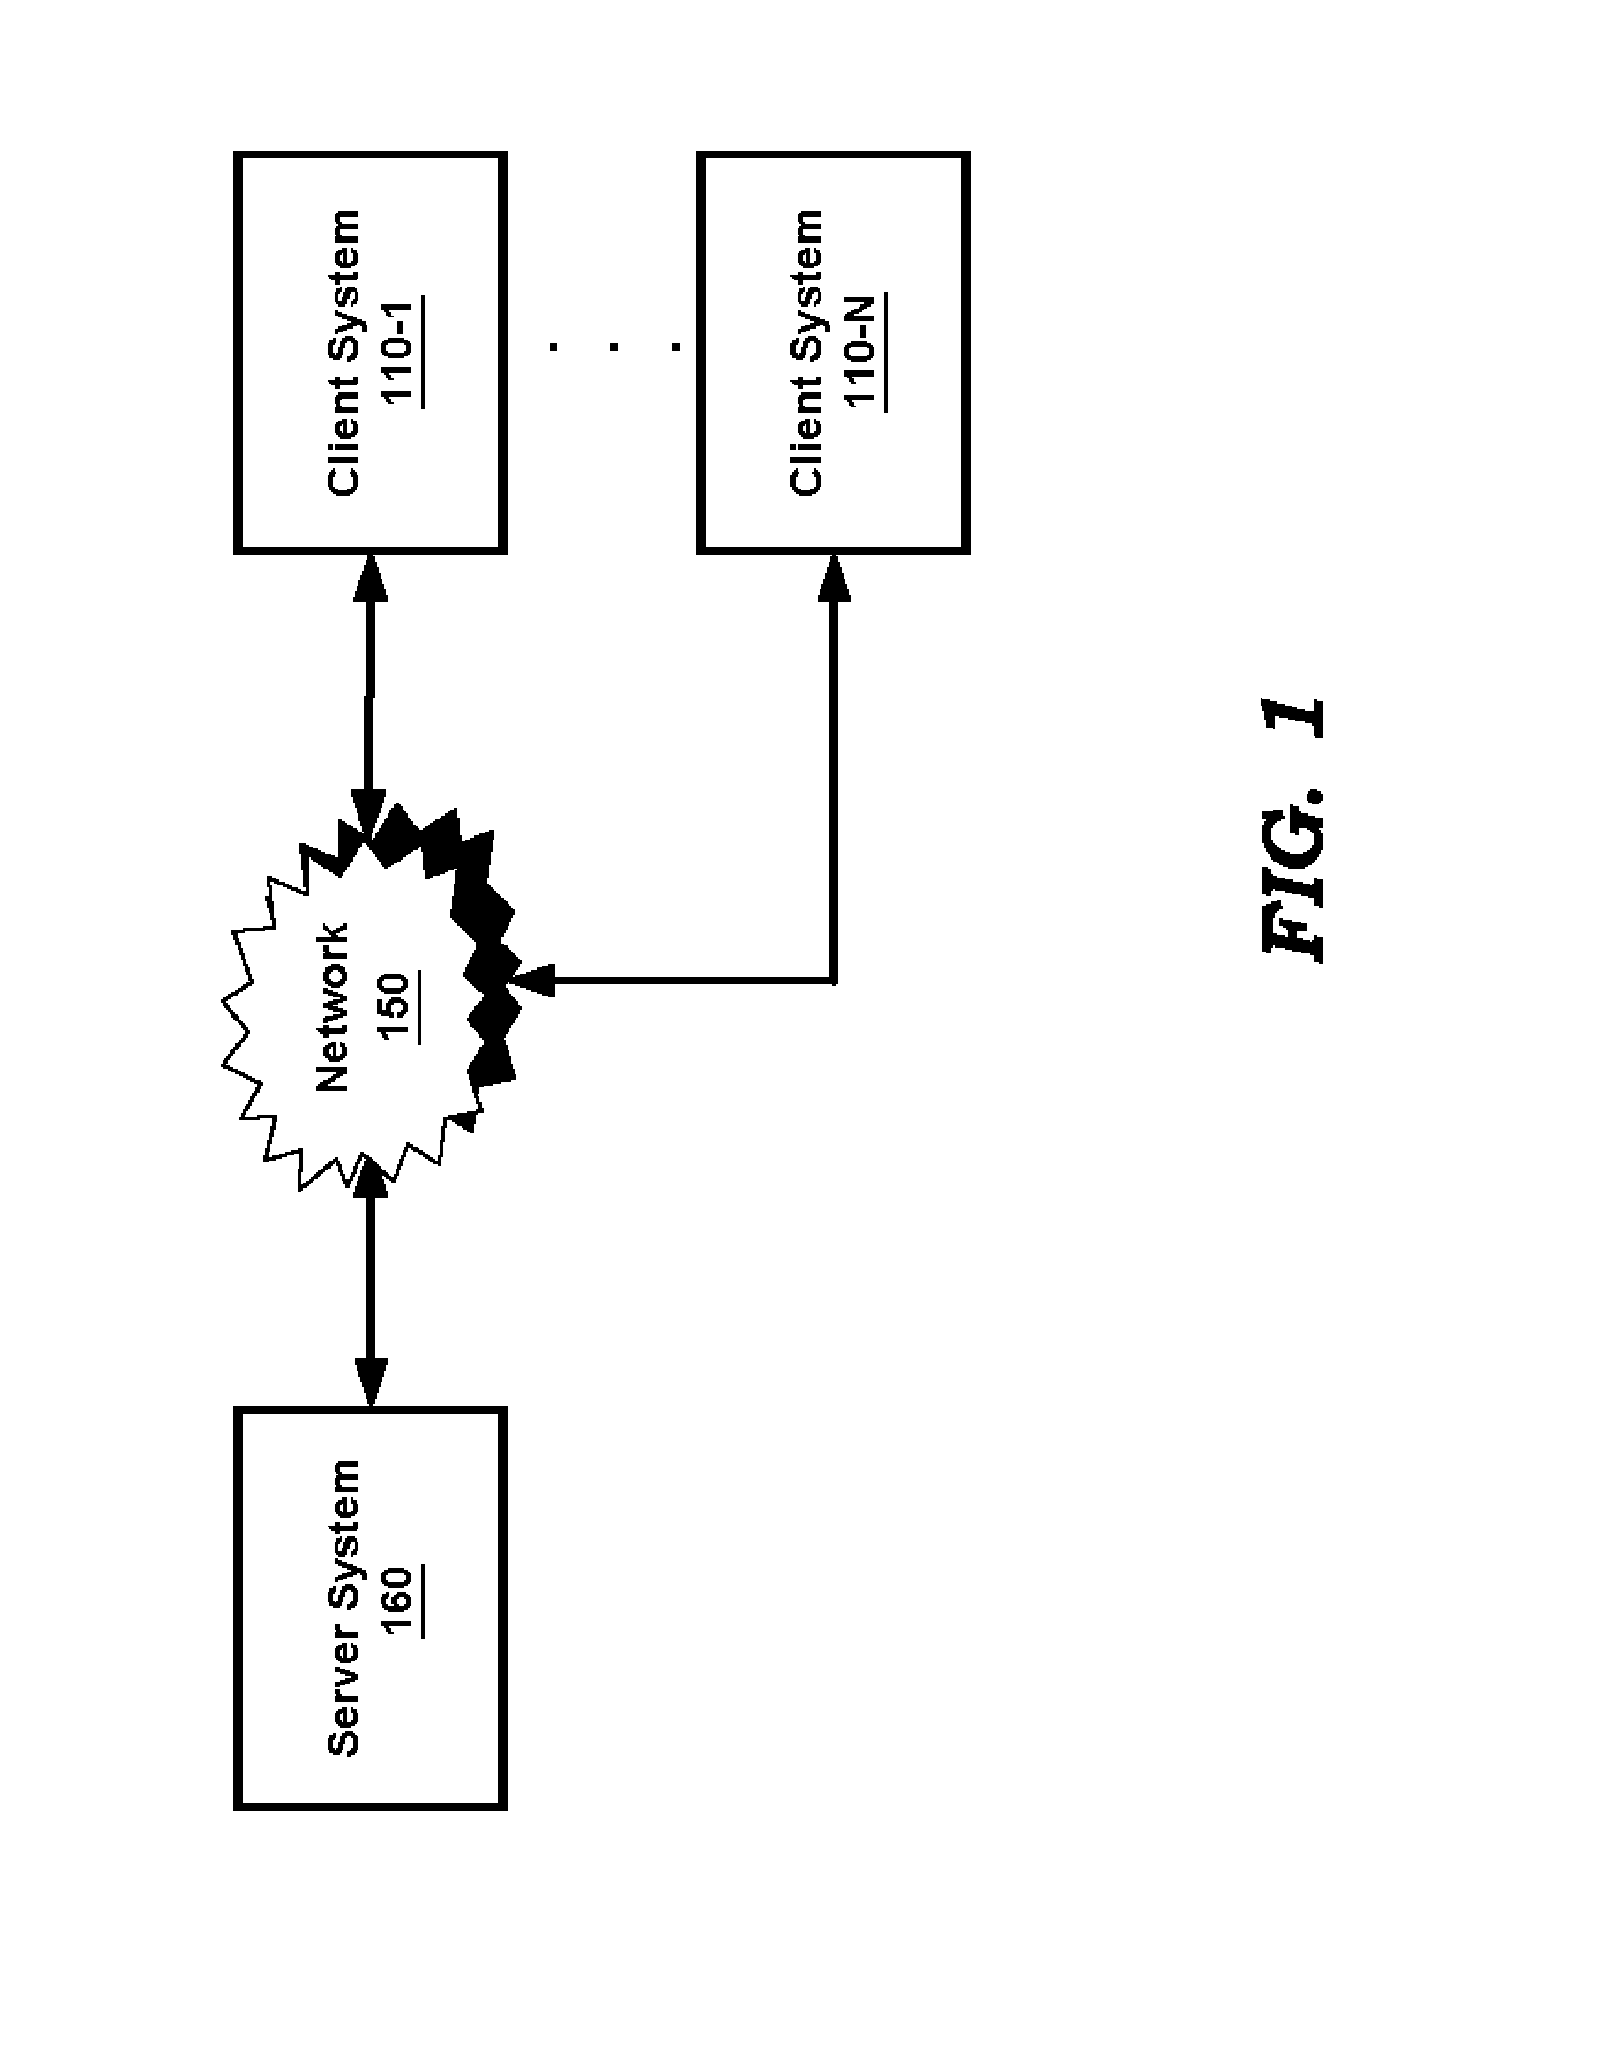 Providing Optimal Number of Threads to Applications Performing Multi-tasking Using Threads